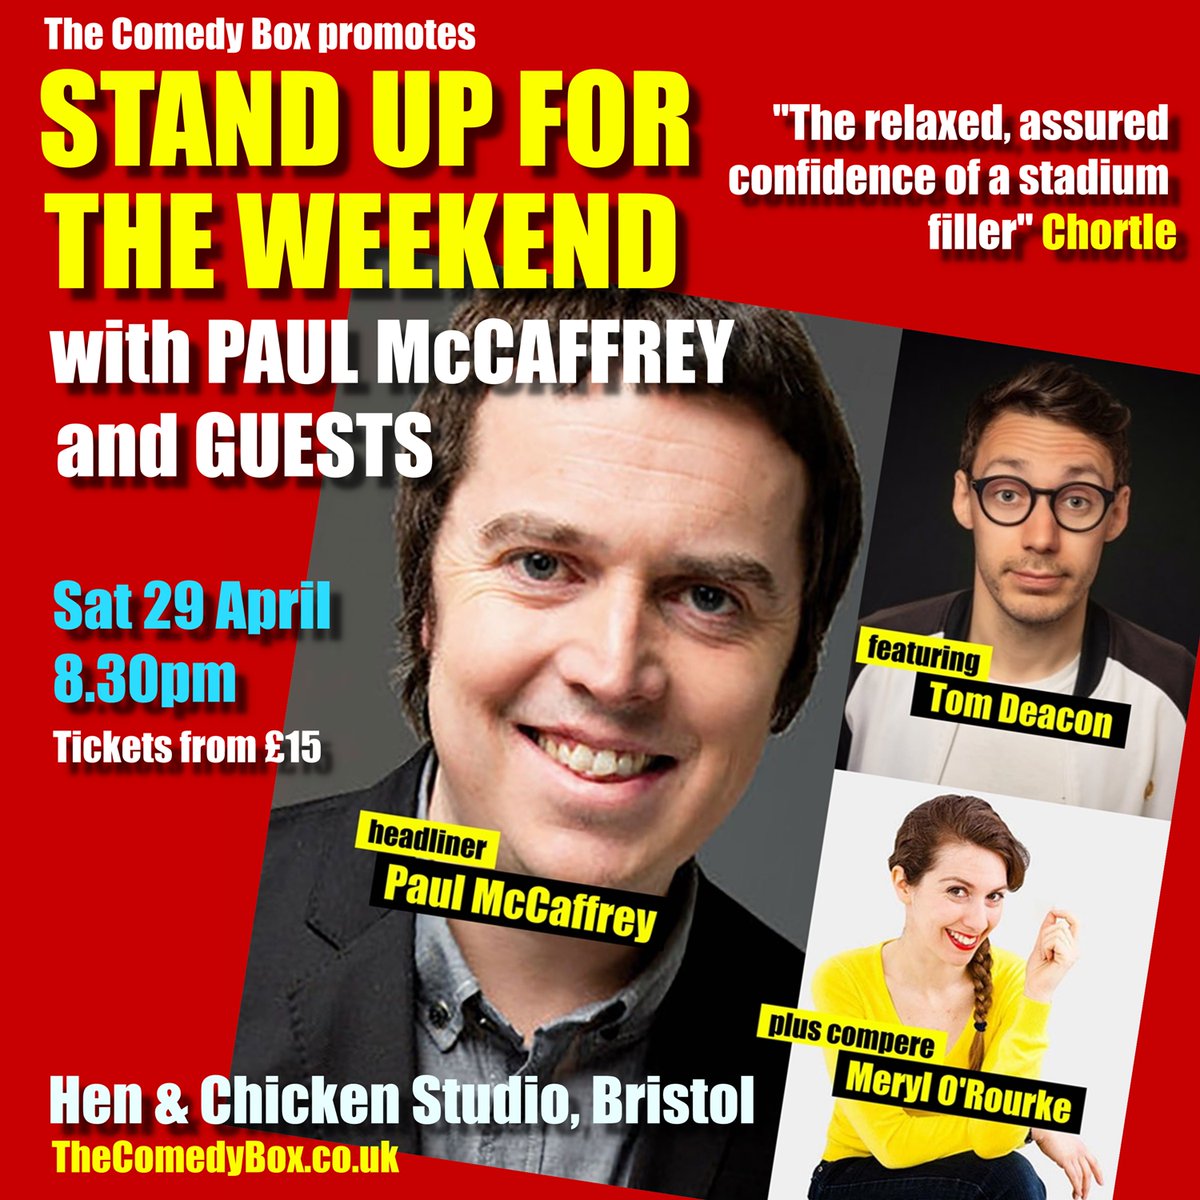 Stand Up For The Weekend with PAUL McCAFFREY and GUESTS featuring TOM DEACON plus compere MERYL O'ROURKE Saturday 29 April - 8.30pm - Tickets from £15 each Table seating with 2-seat and 4-seat tables Hen & Chicken Studio, Bristol Book online: bit.ly/43SAy4L